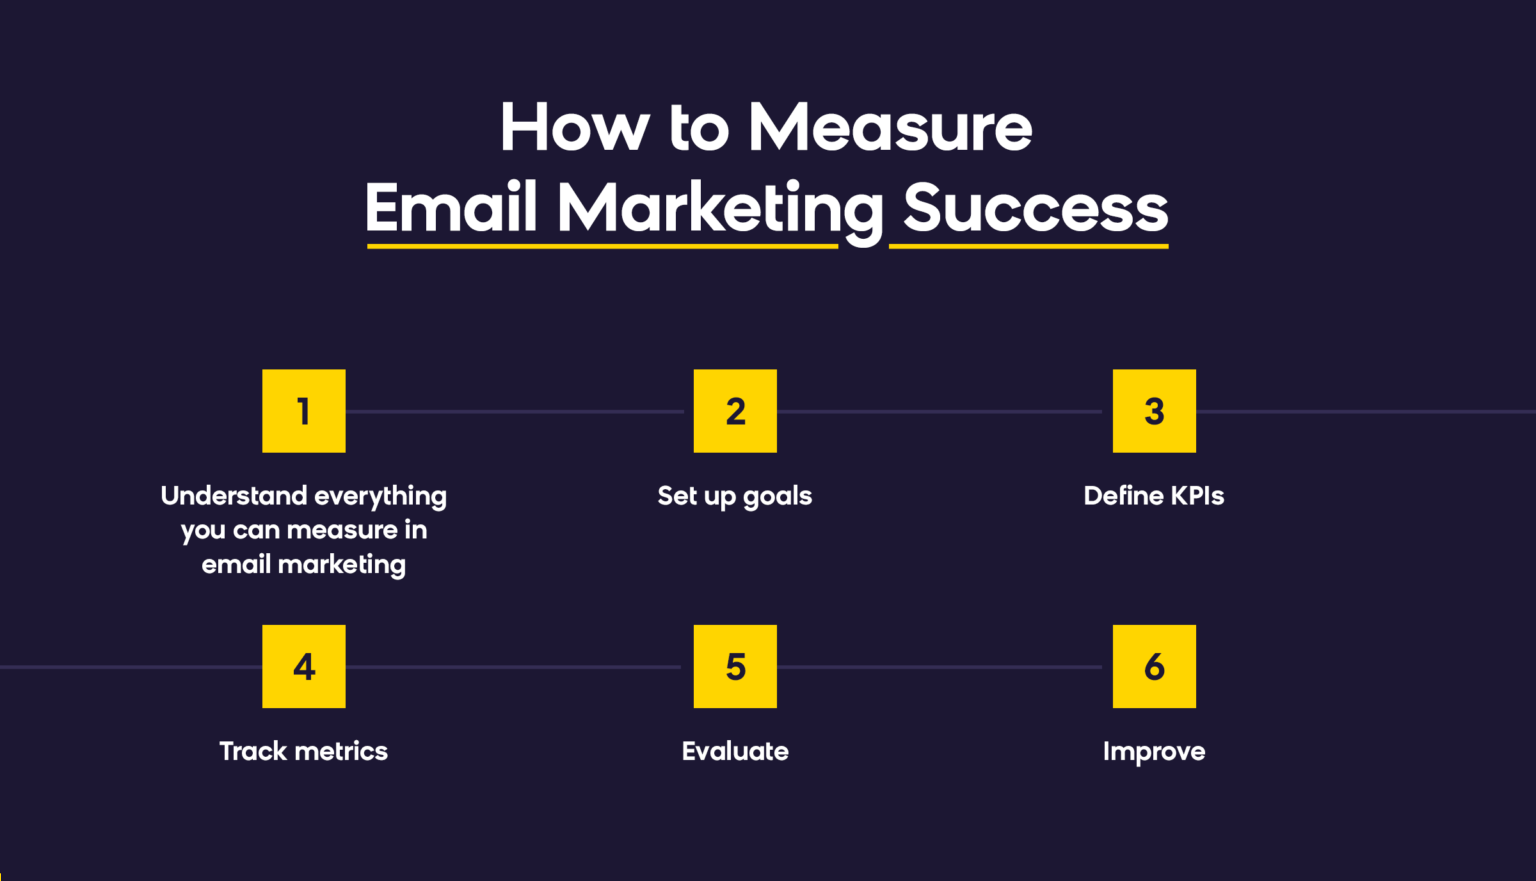 A six step process for how companies can measure email marketing success